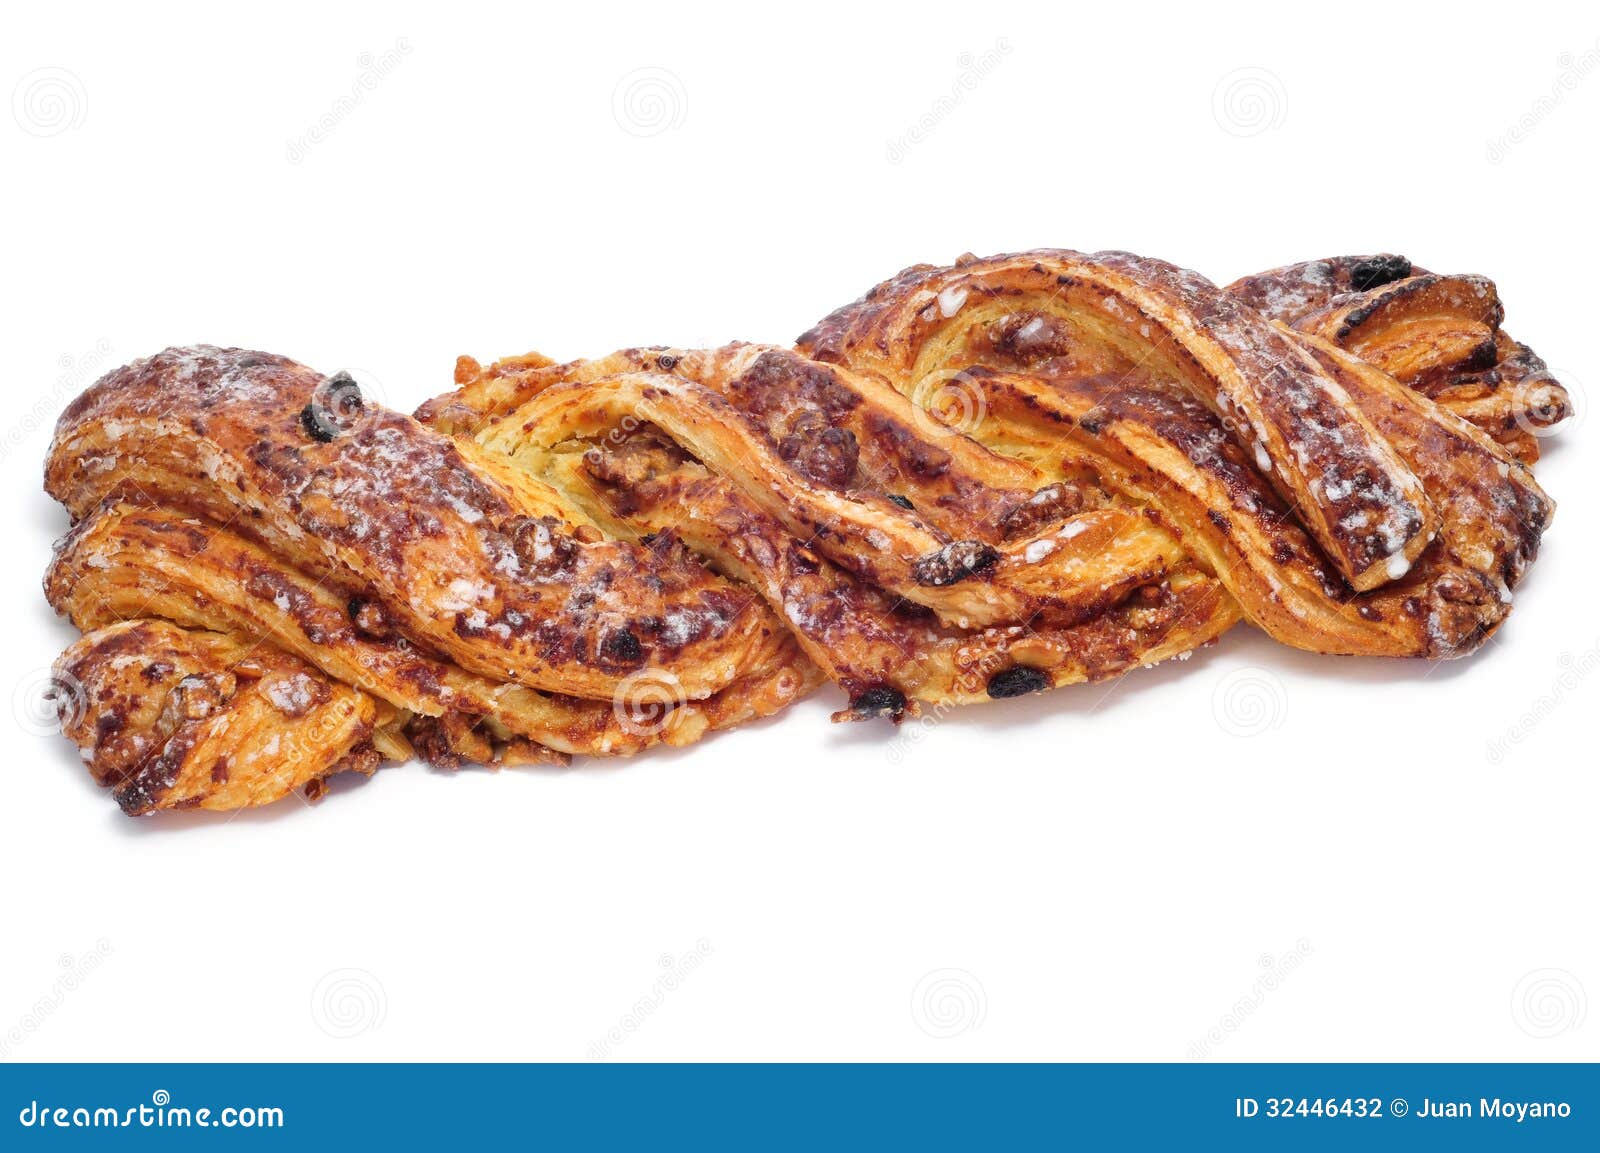 spanish trenza de almudevar, a typical braided pastry